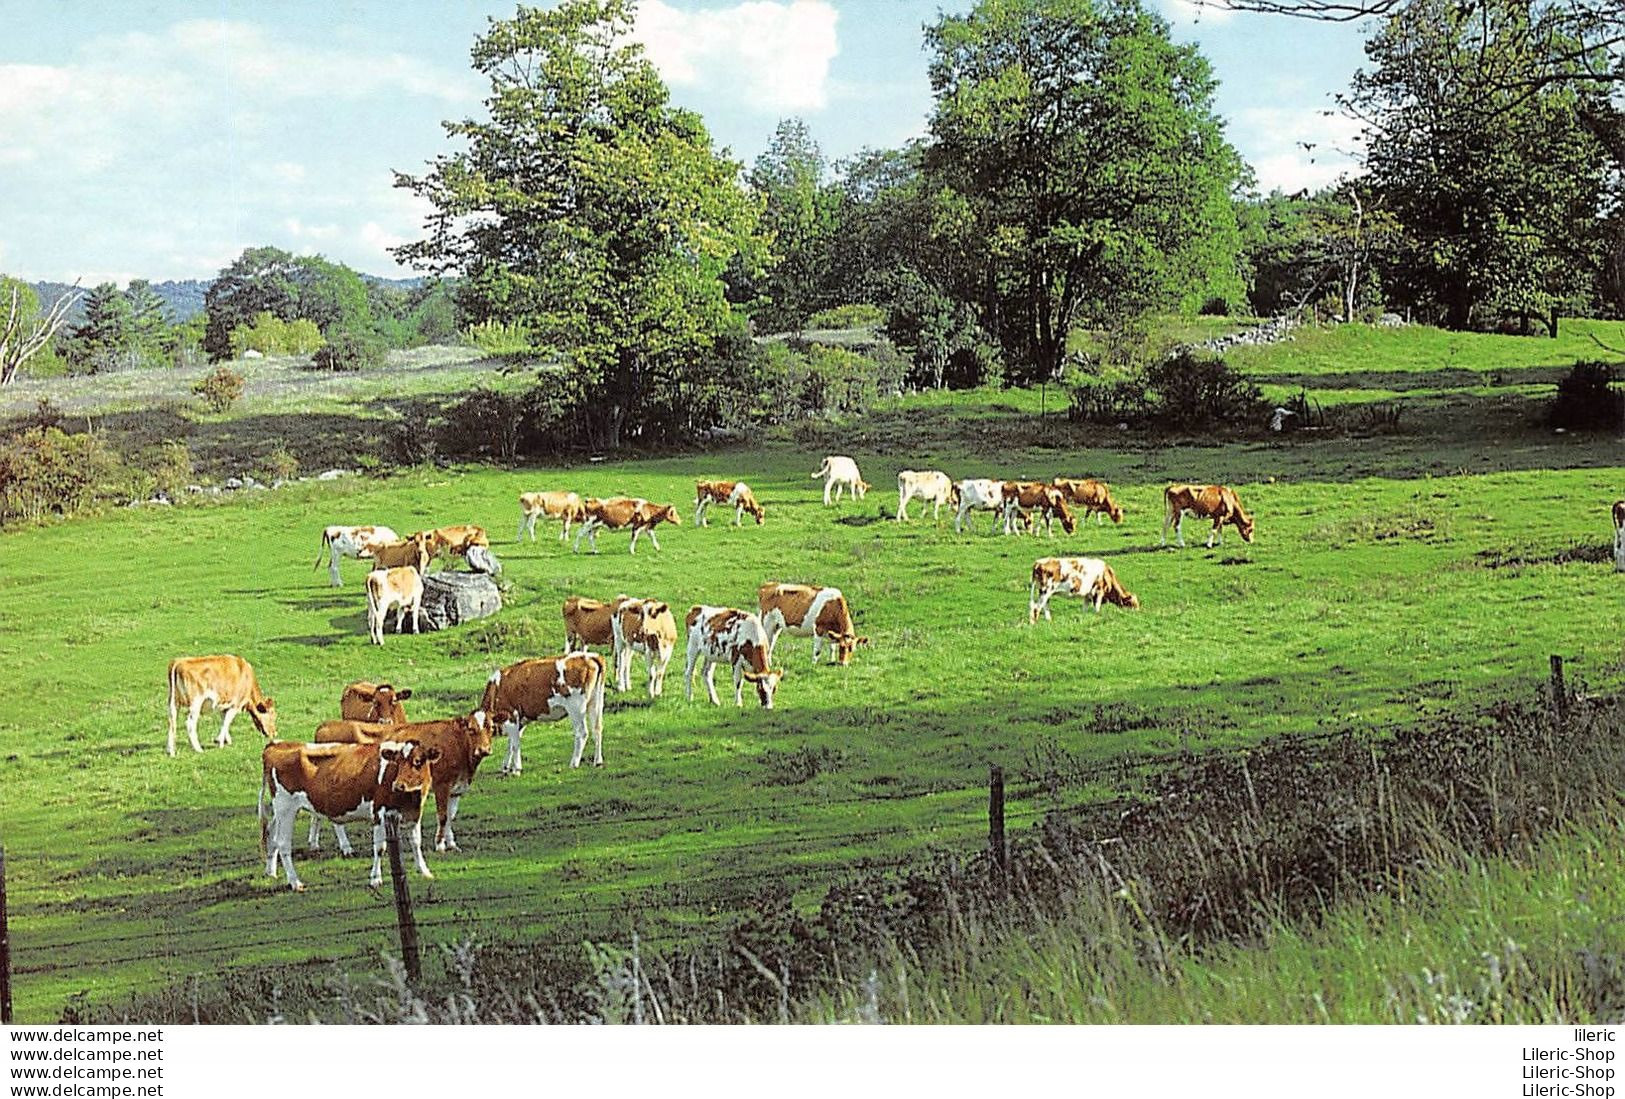 NEW ENGLAND COUNTRYSIDE # COWS # VACHES -  Photo By Shirley A. Forward  - Cows